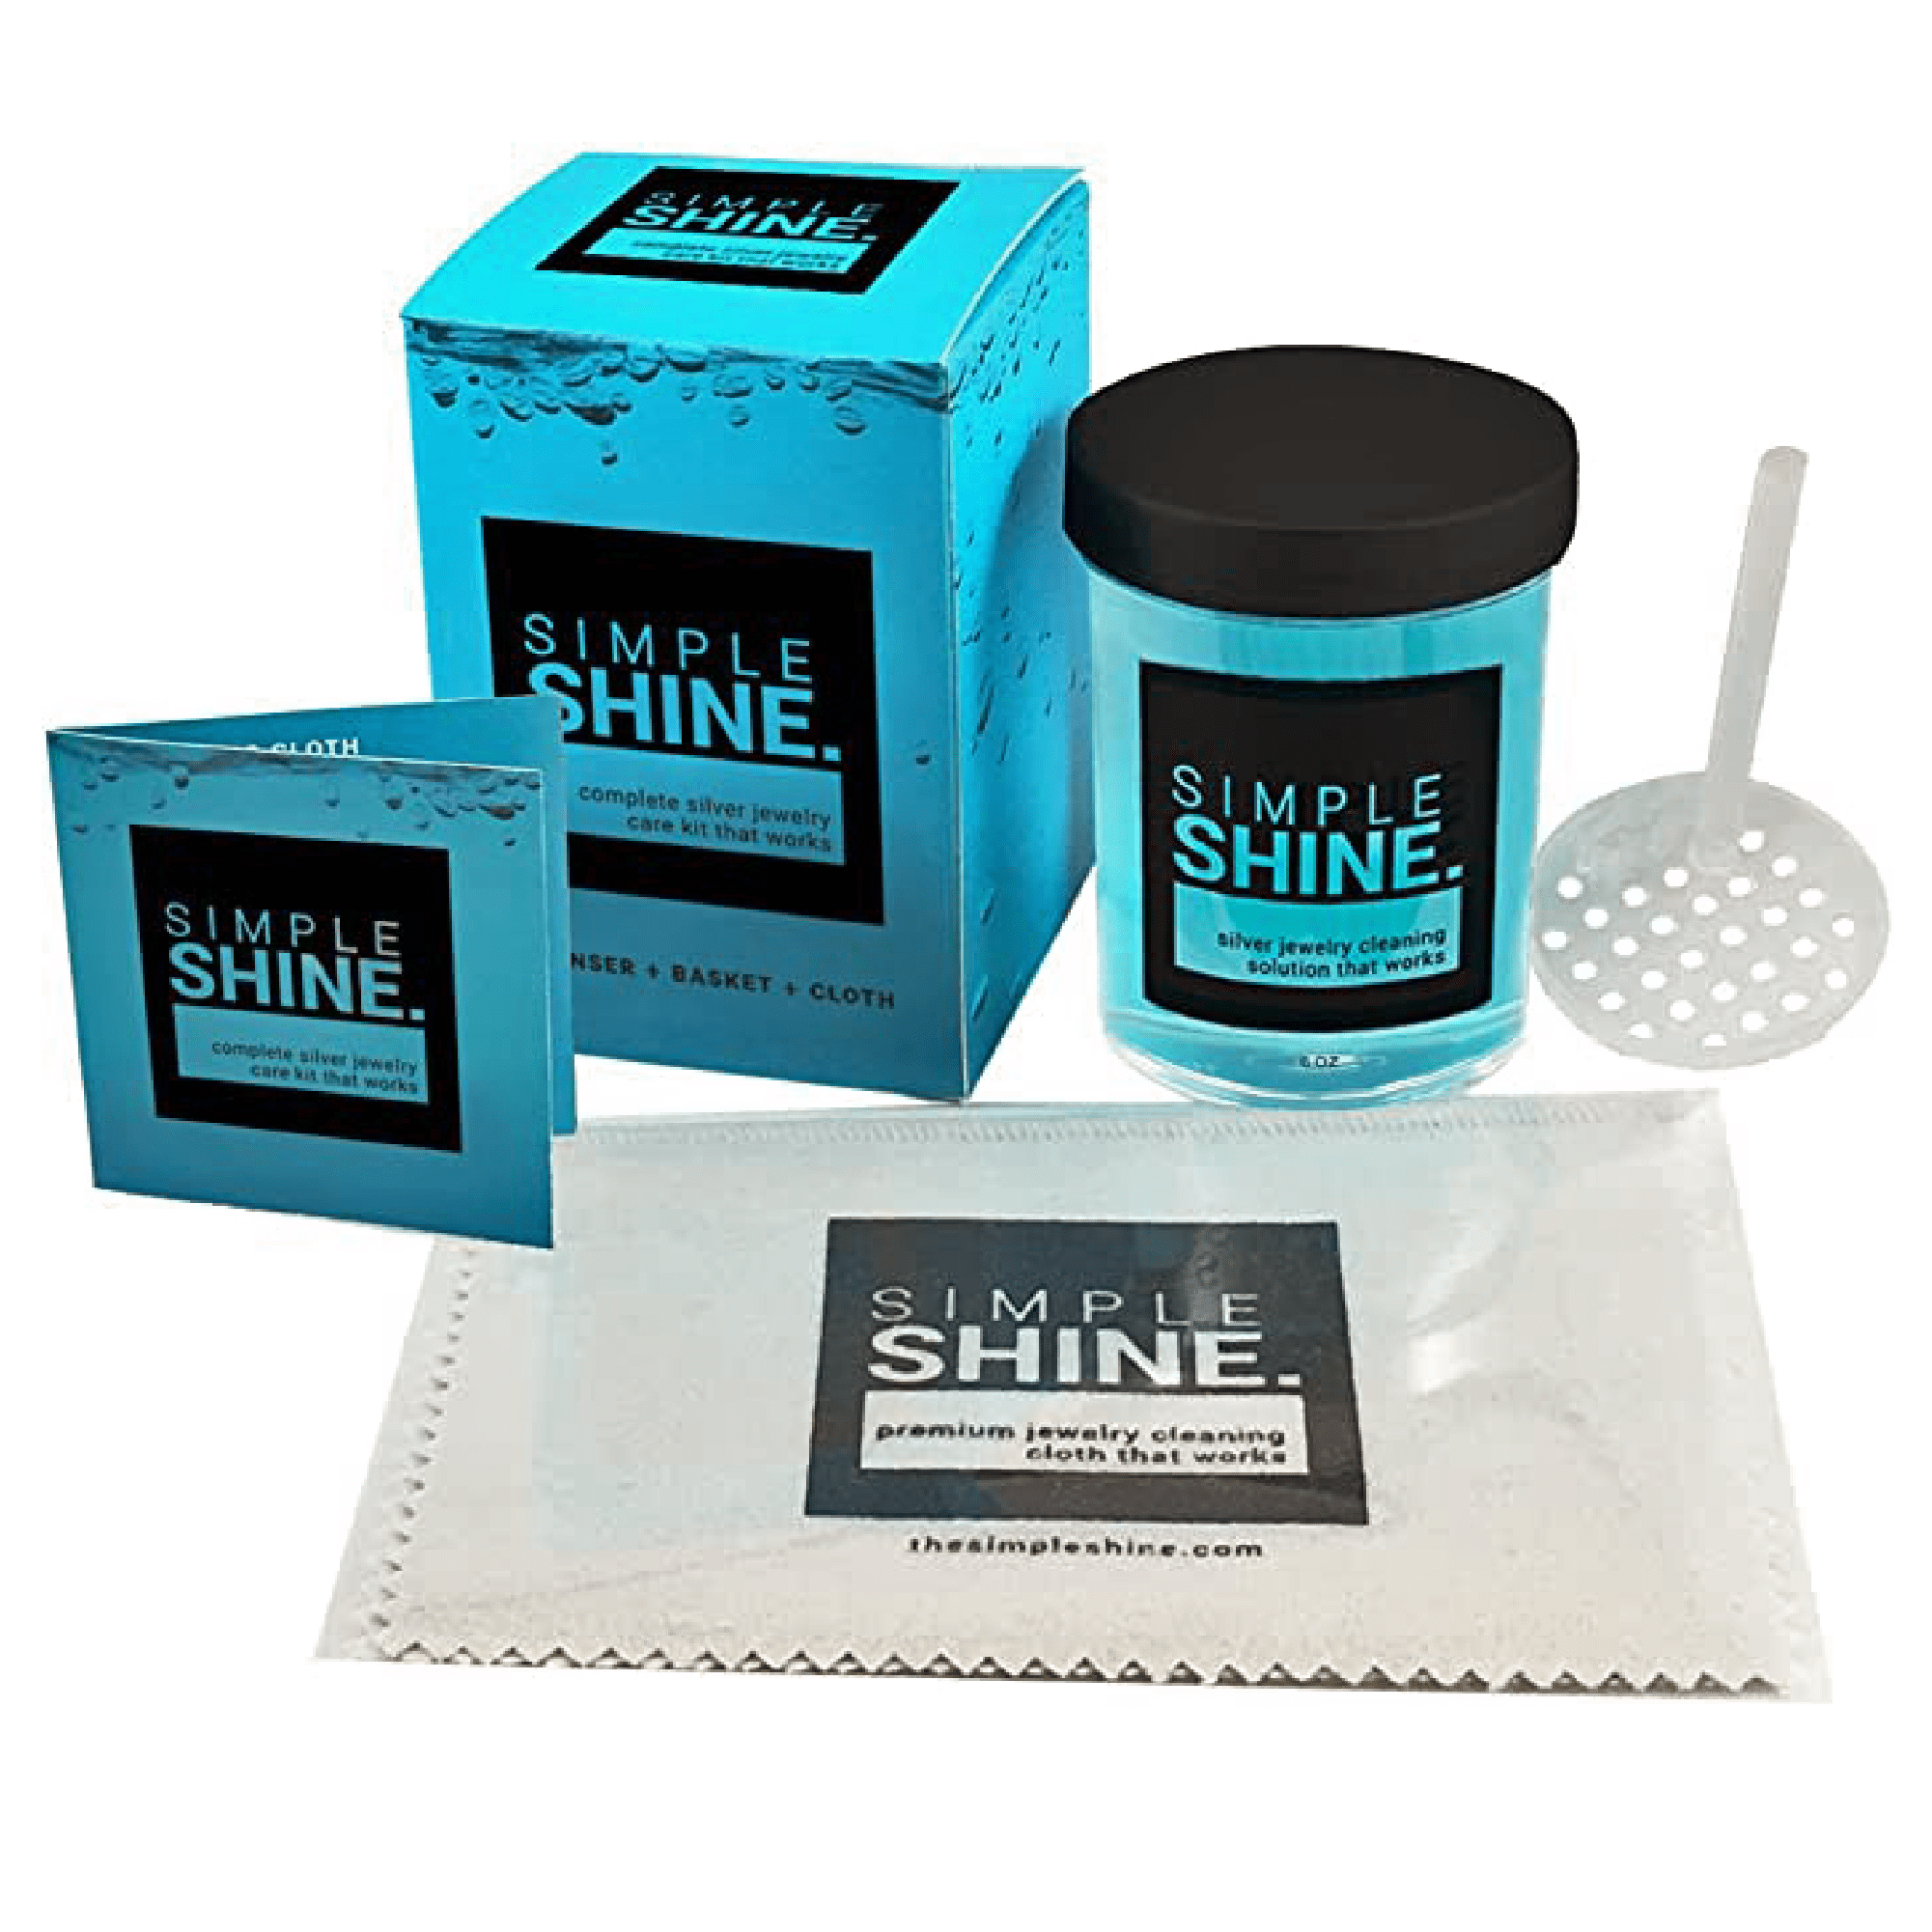 Simple Shine Silver Jewelry Cleaning Kit - Solution, Cloth, Dip Tray